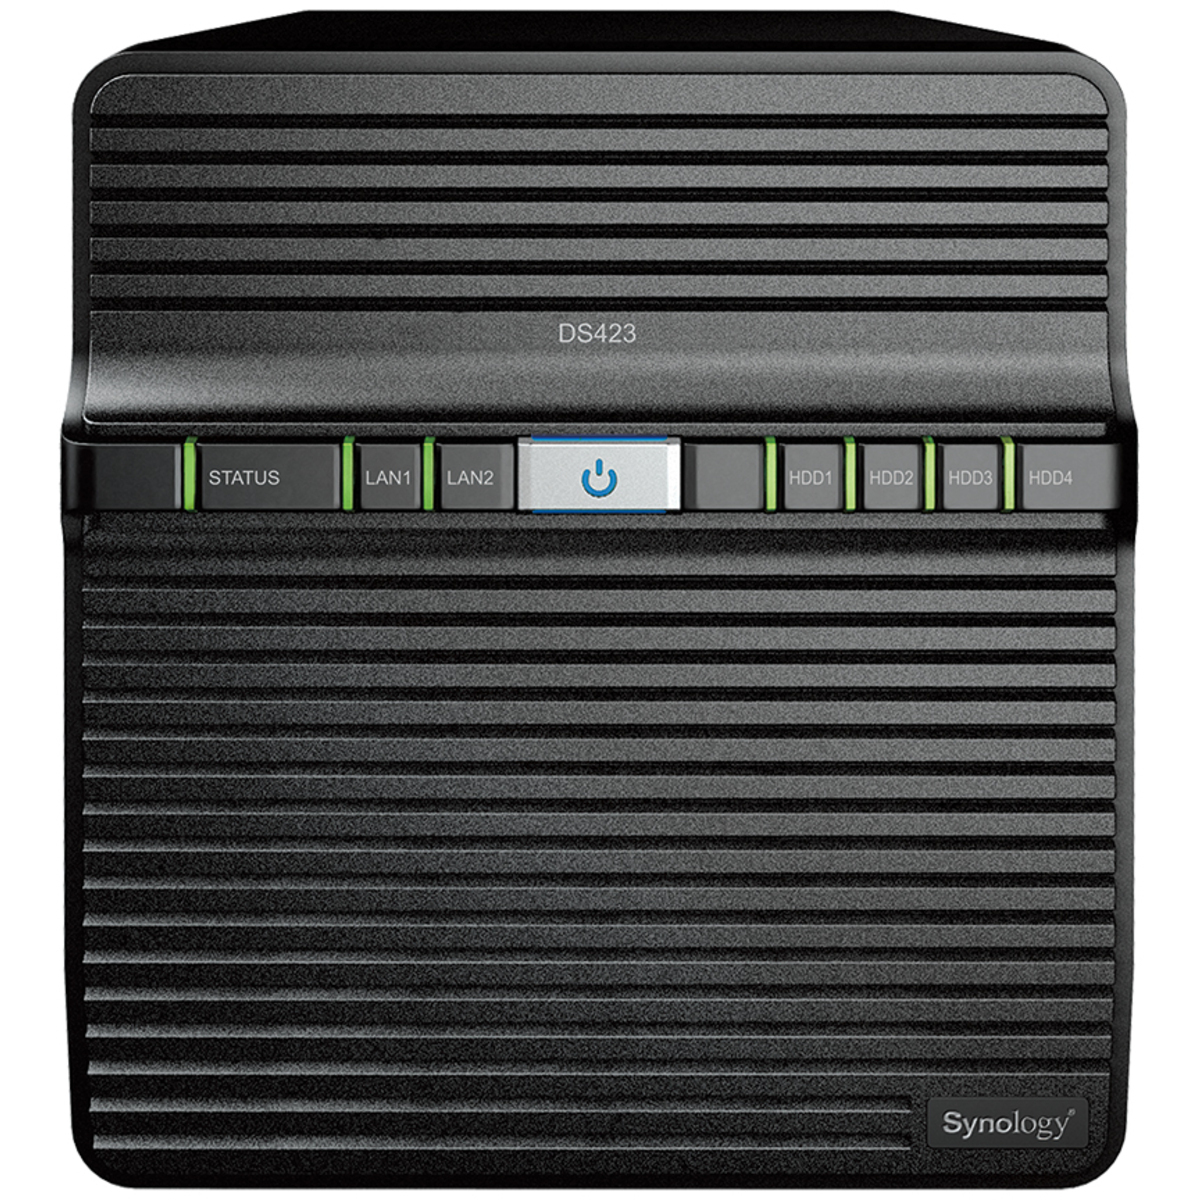 Synology DiskStation DS423 24tb 4-Bay Desktop Personal / Basic Home / Small Office NAS - Network Attached Storage Device 3x8tb Western Digital Ultrastar DC HC320 HUS728T8TALE6L4 3.5 7200rpm SATA 6Gb/s HDD ENTERPRISE Class Drives Installed - Burn-In Tested DiskStation DS423